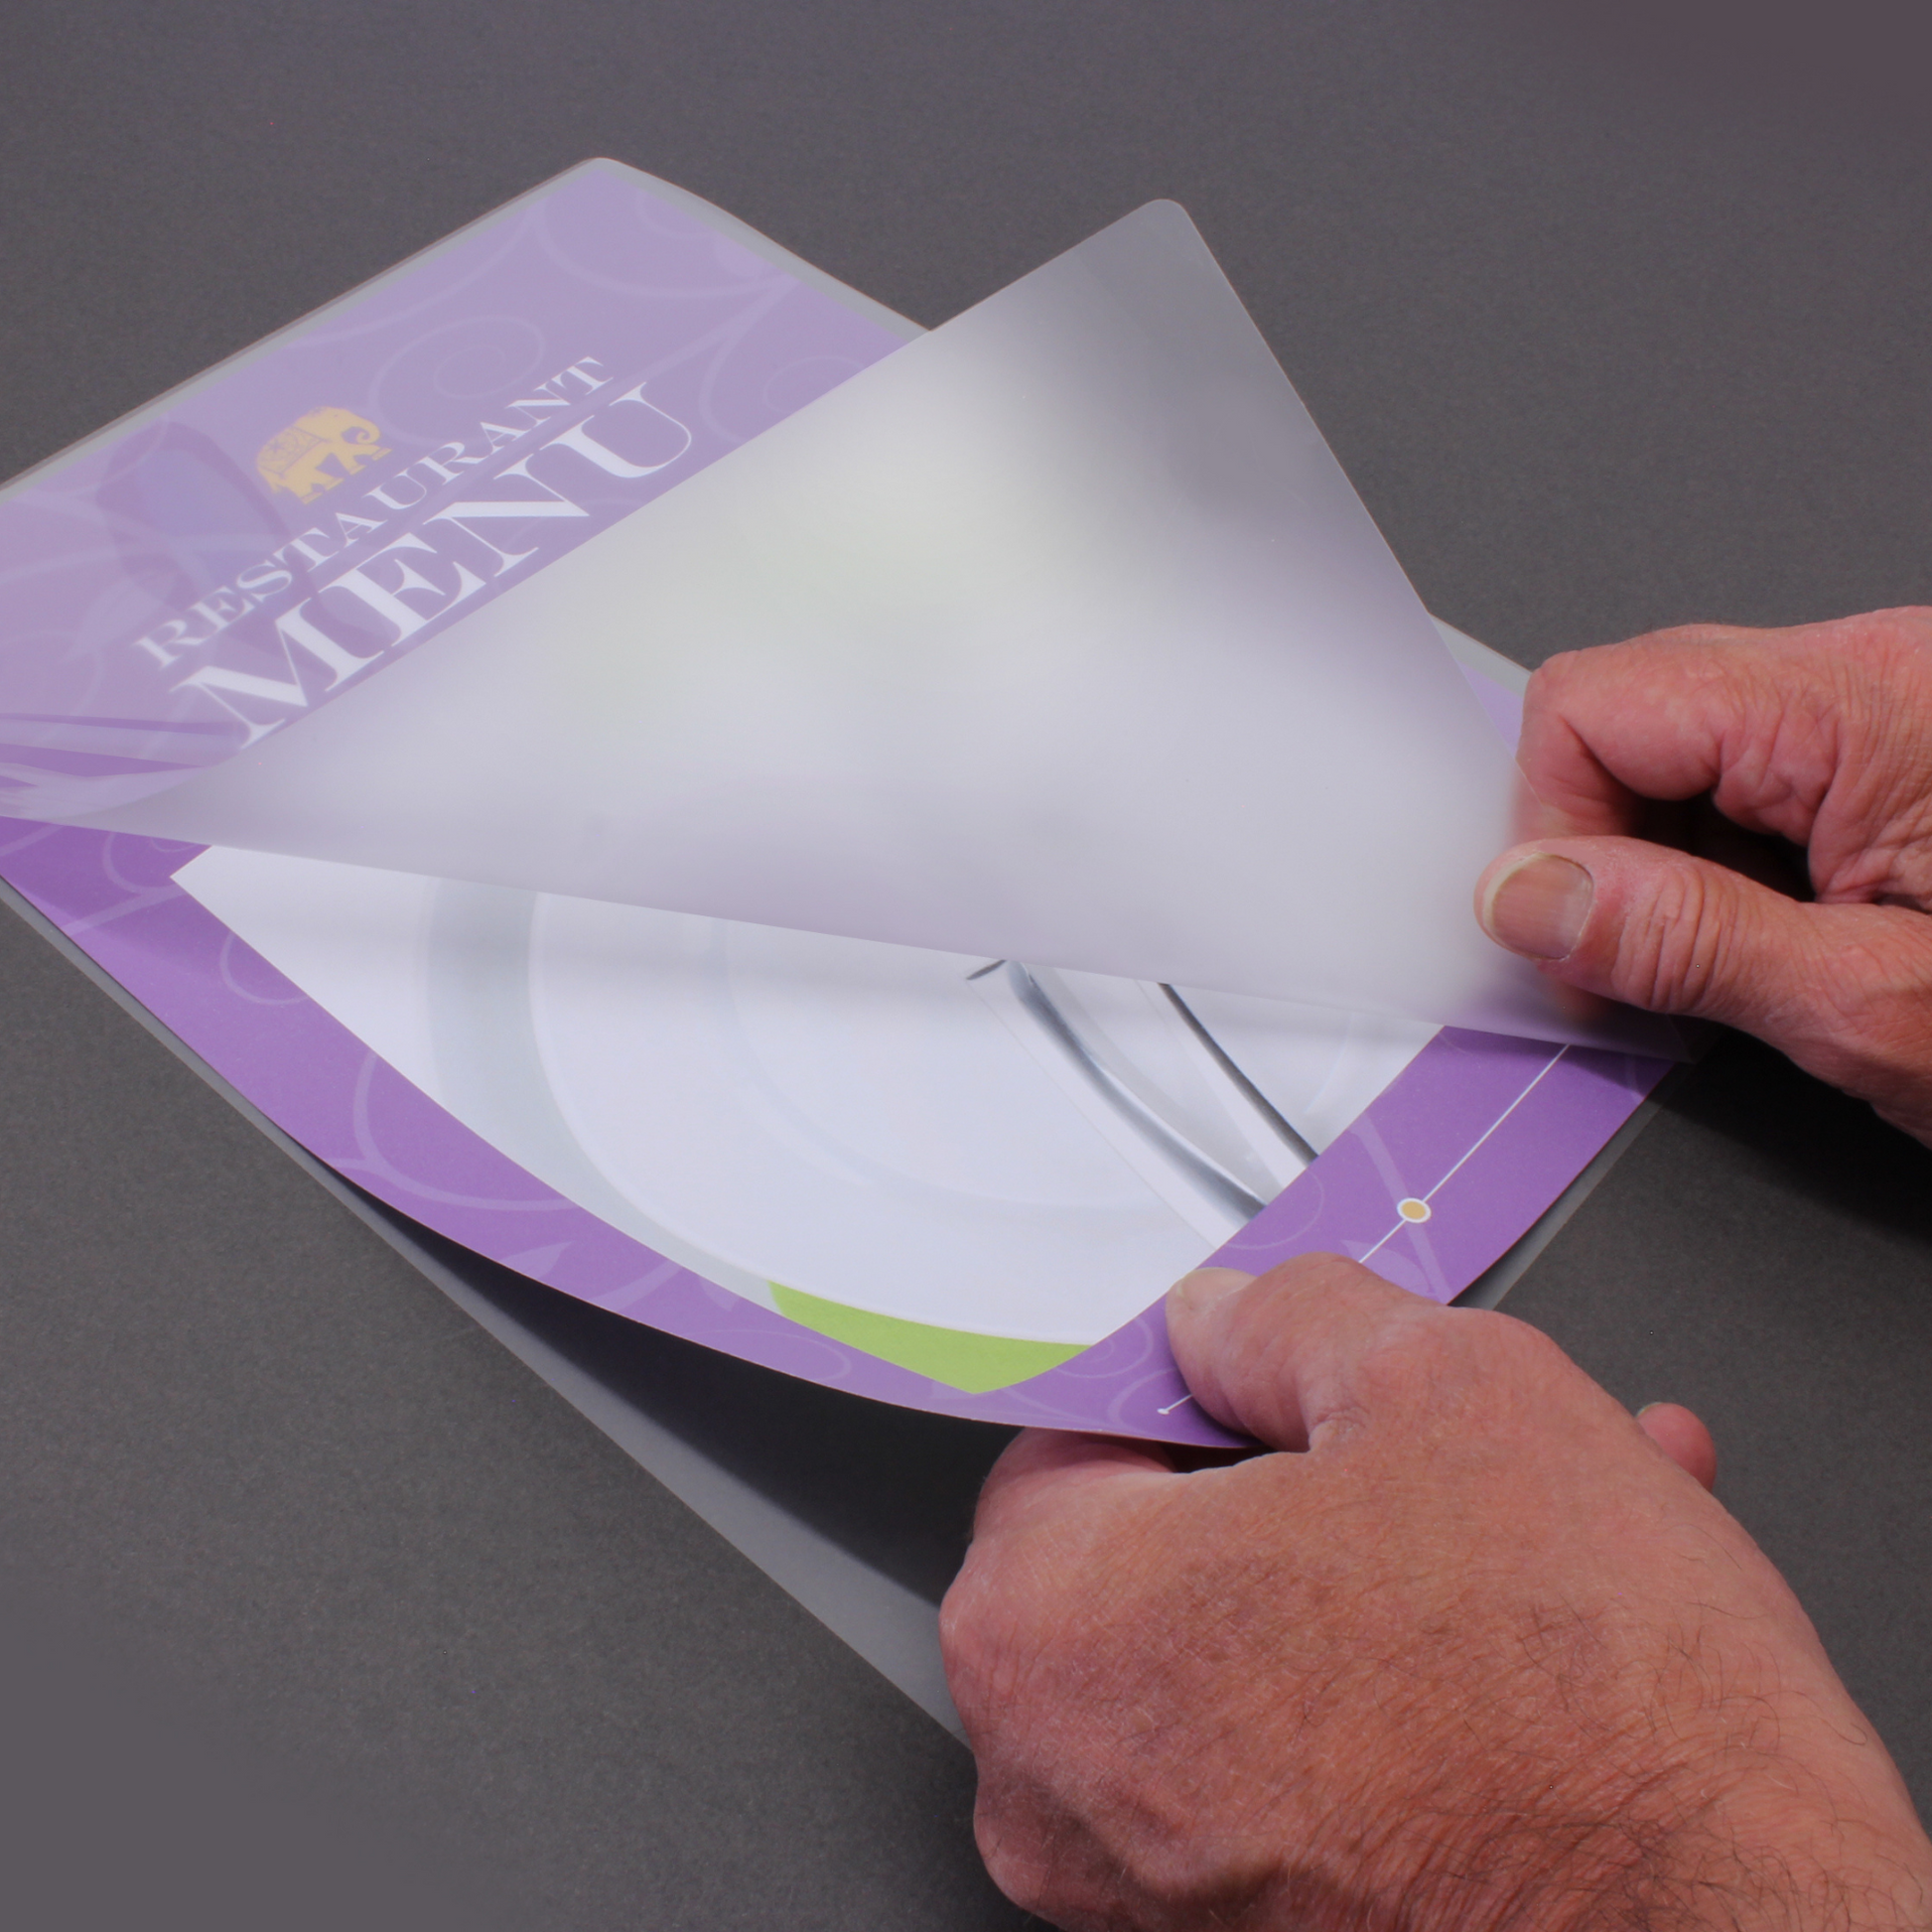 A person's hands peeling open an A4 gloss laminating pouch, 150 micron, with a restaurant menu about to be inserted, depicting the process of preparing items for lamination.